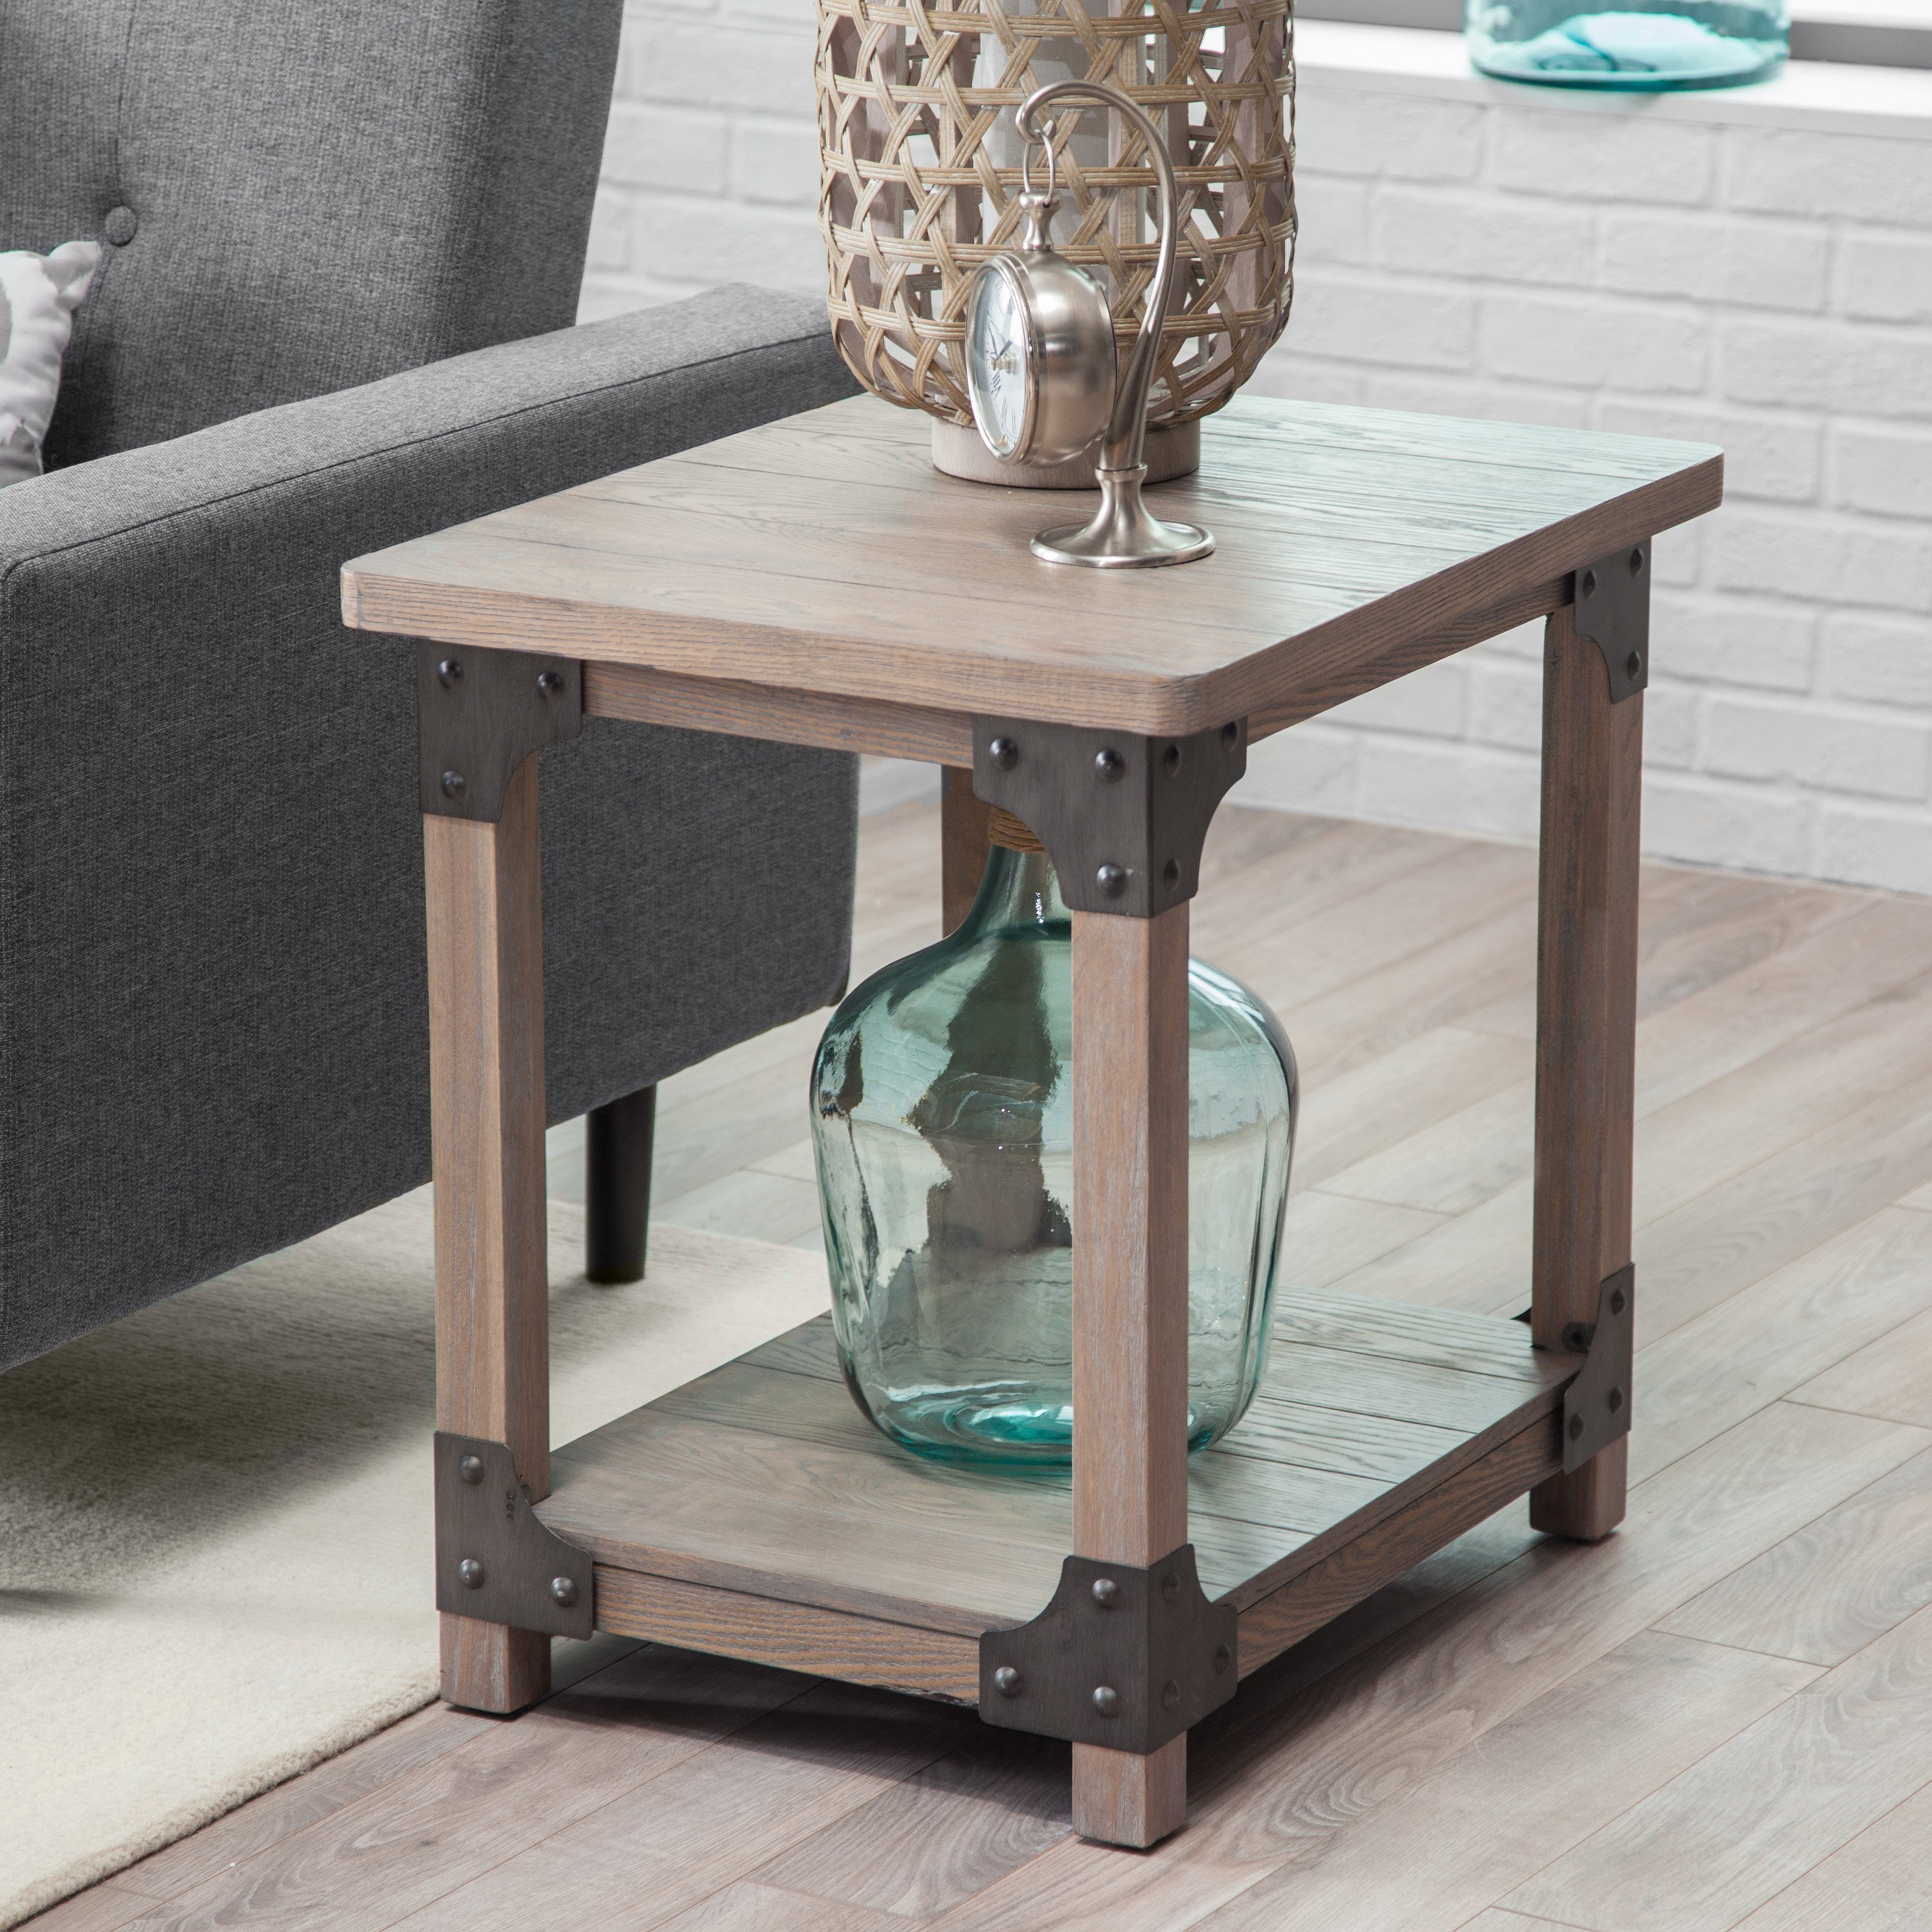 furniture laurel foundry modern farmhouse likens end table reviews round coffee ikea probably fantastic free also with super awesome long accent and latest mango wood dining linen